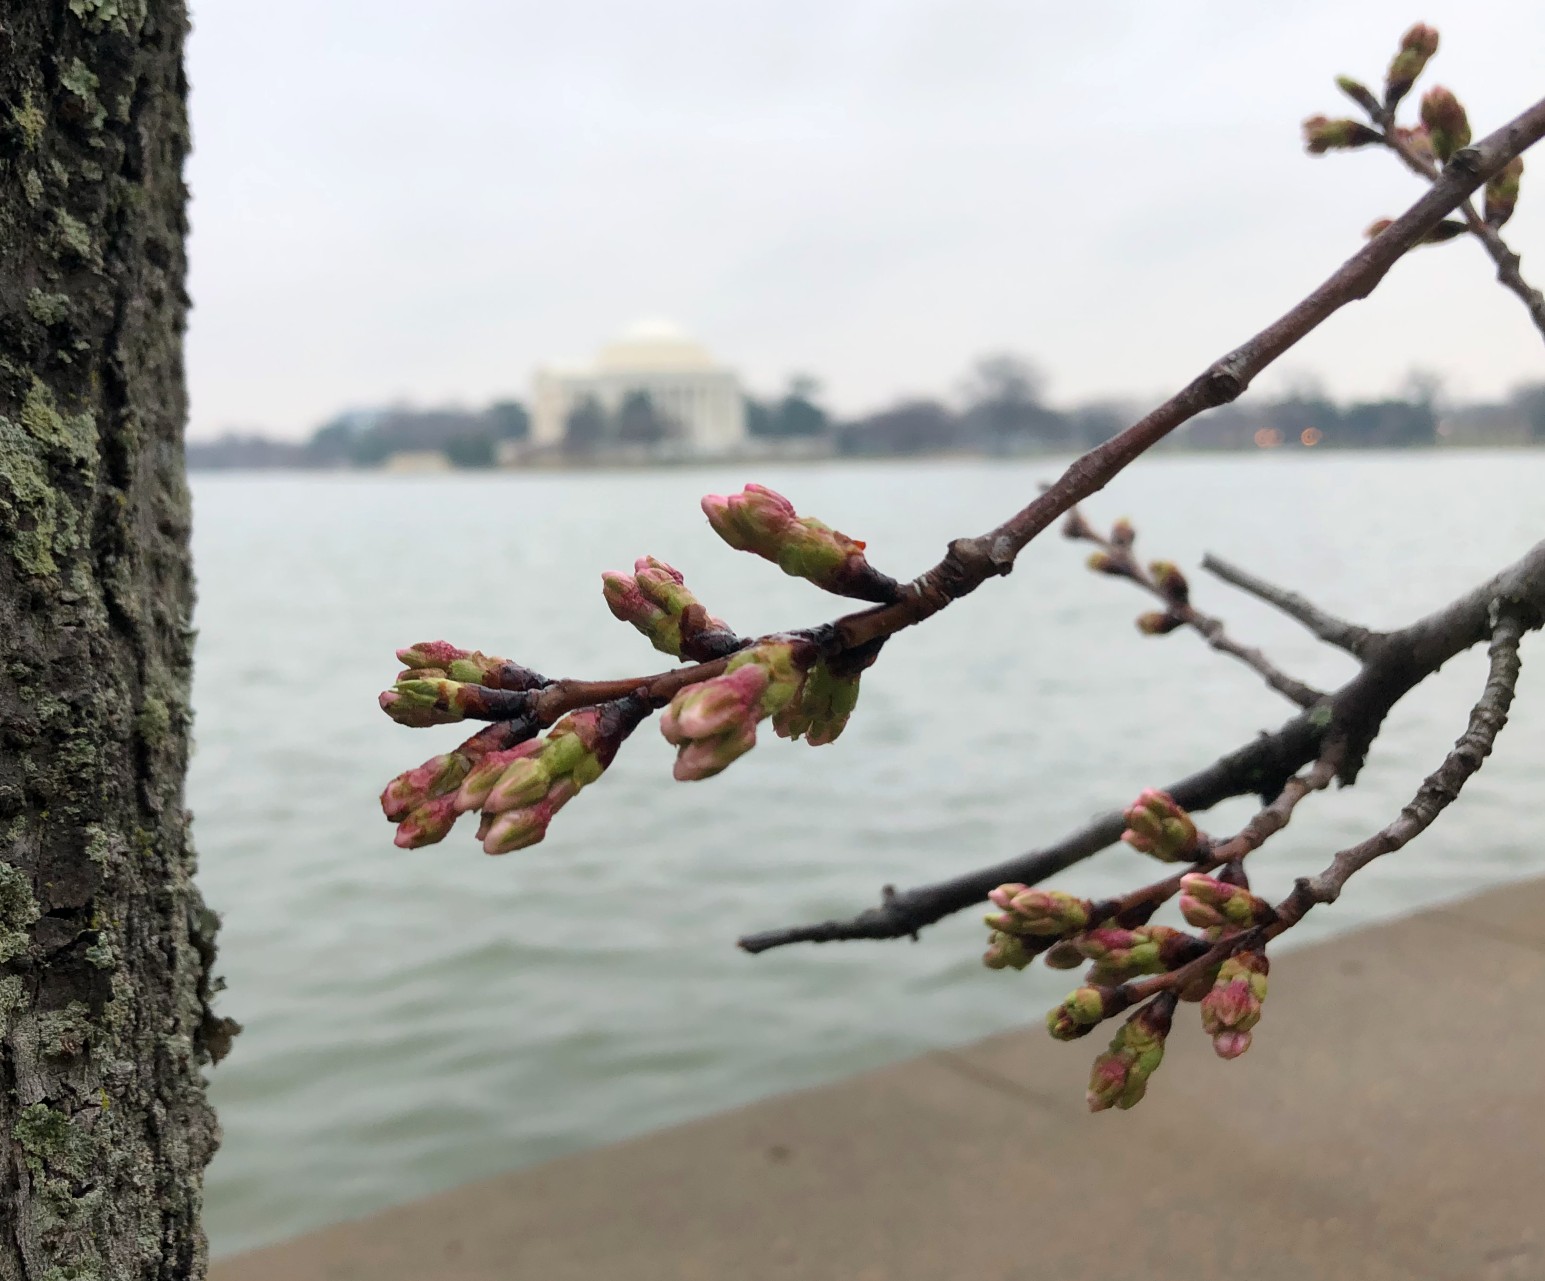 A close-up of cherry trees buds shows the stalks that hold the blossoms have lengthened.